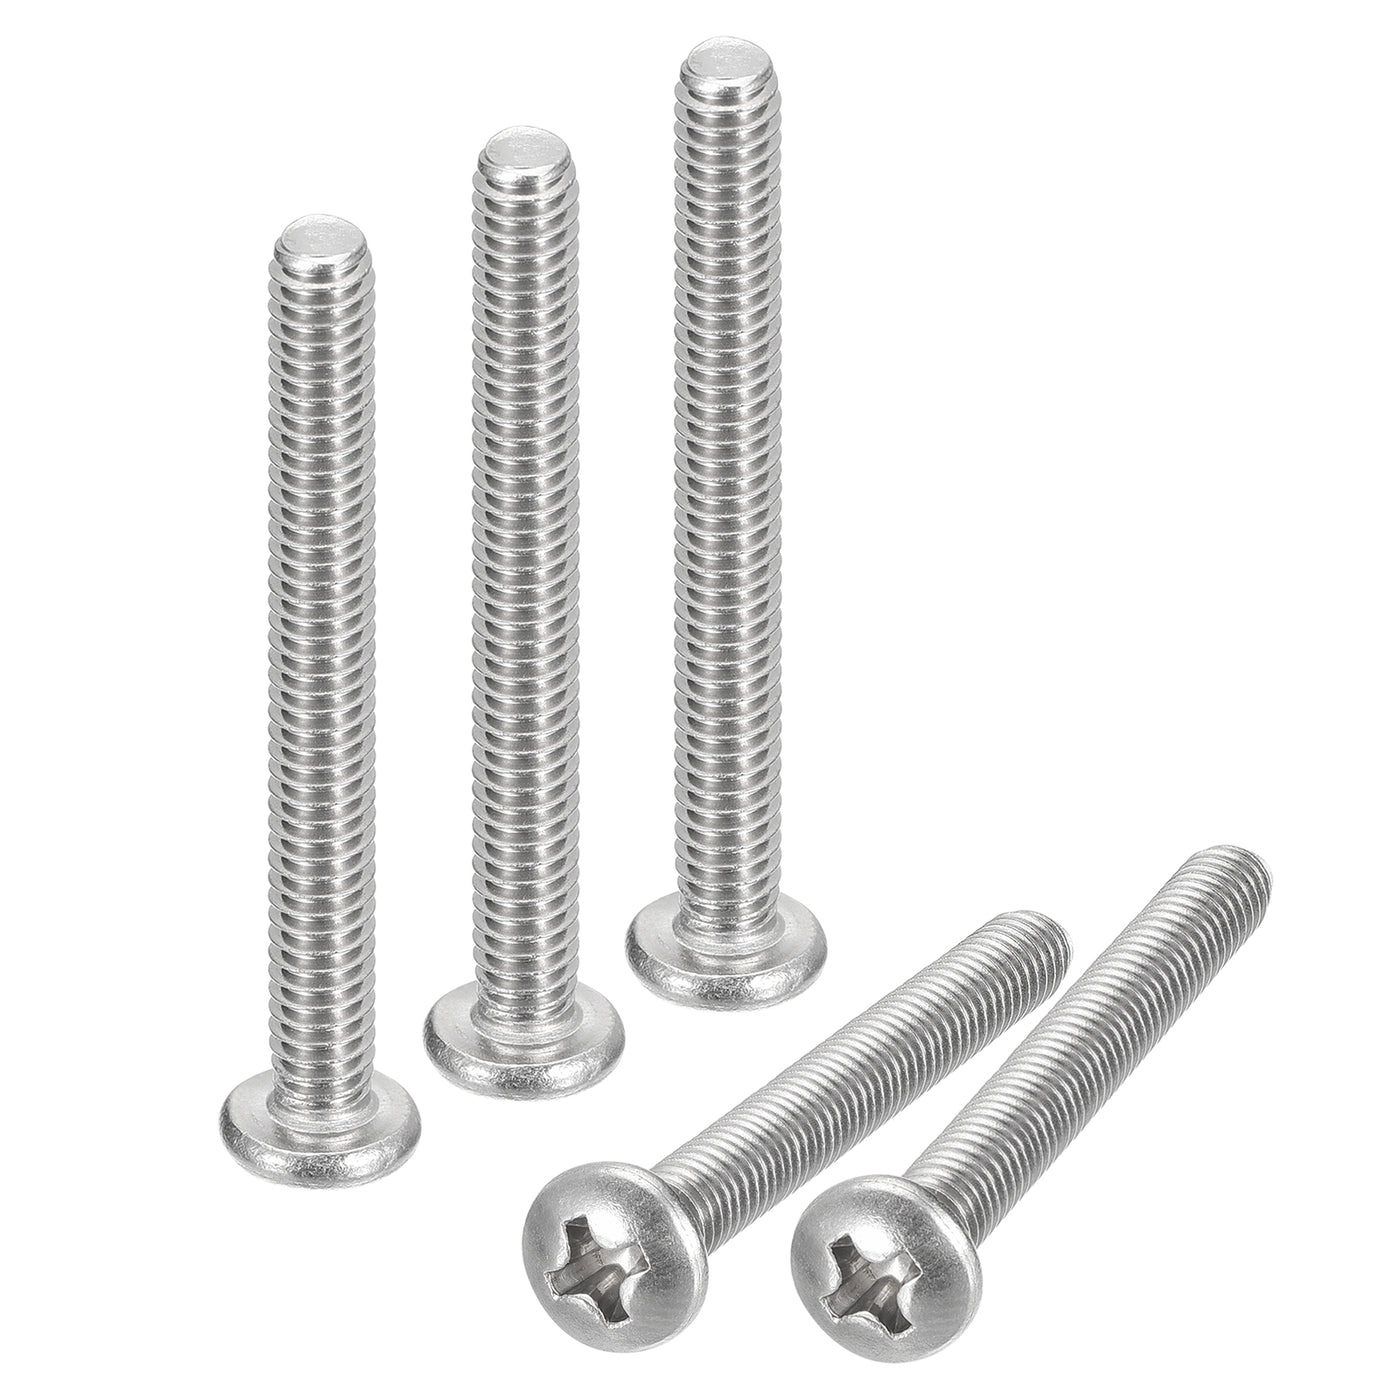 uxcell Uxcell #8-32x2-1/4" Pan Head Machine Screws, Stainless Steel 18-8 Screw, Pack of 10